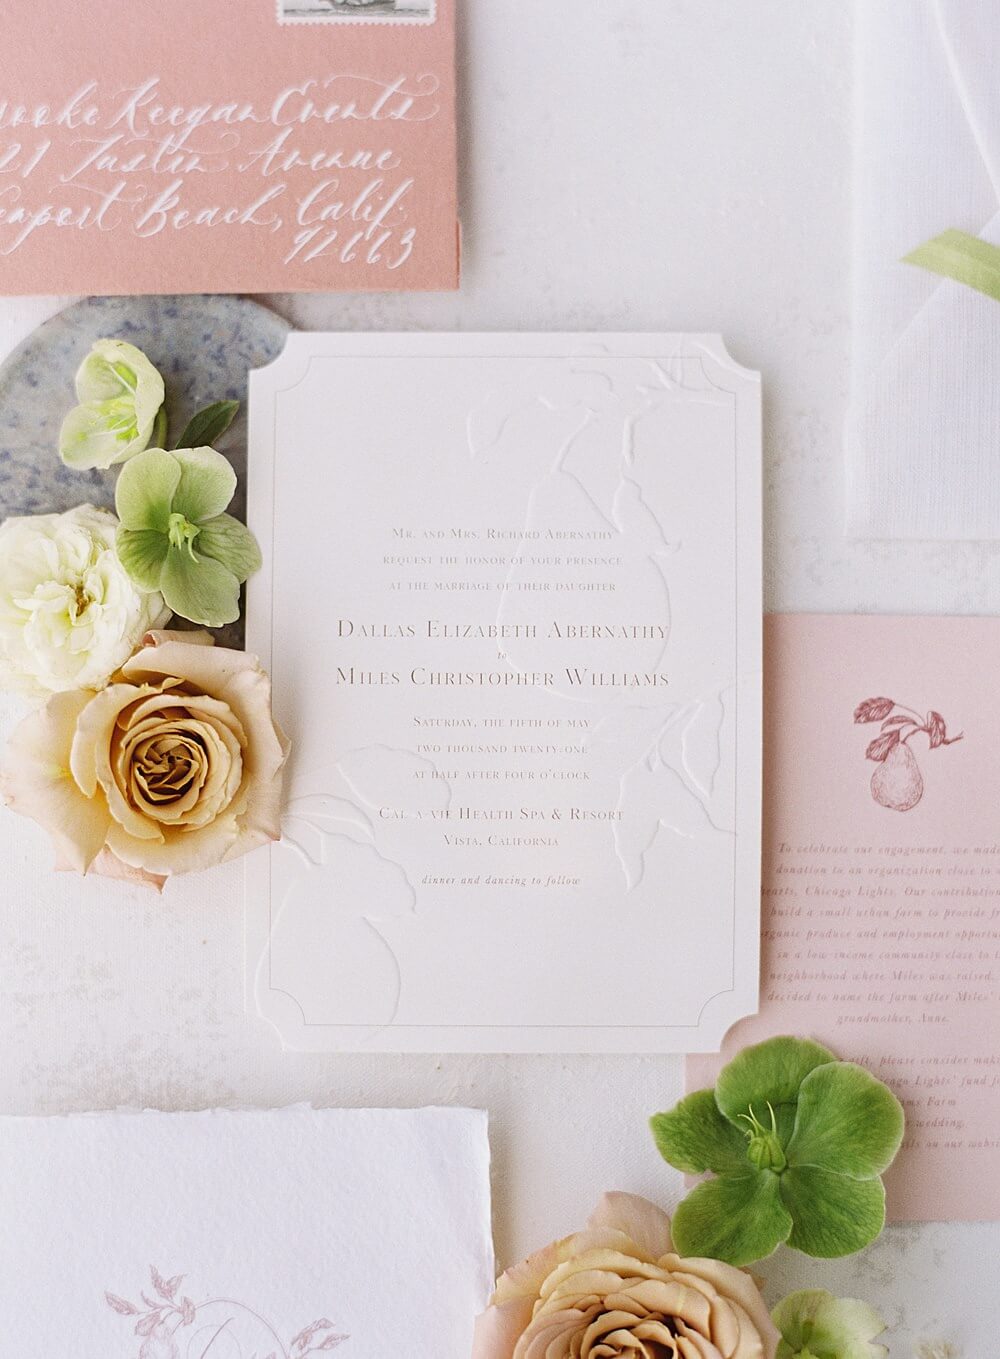 Peach cream and green wedding invitations with pear embossing details  - Jacqueline Benét Photography